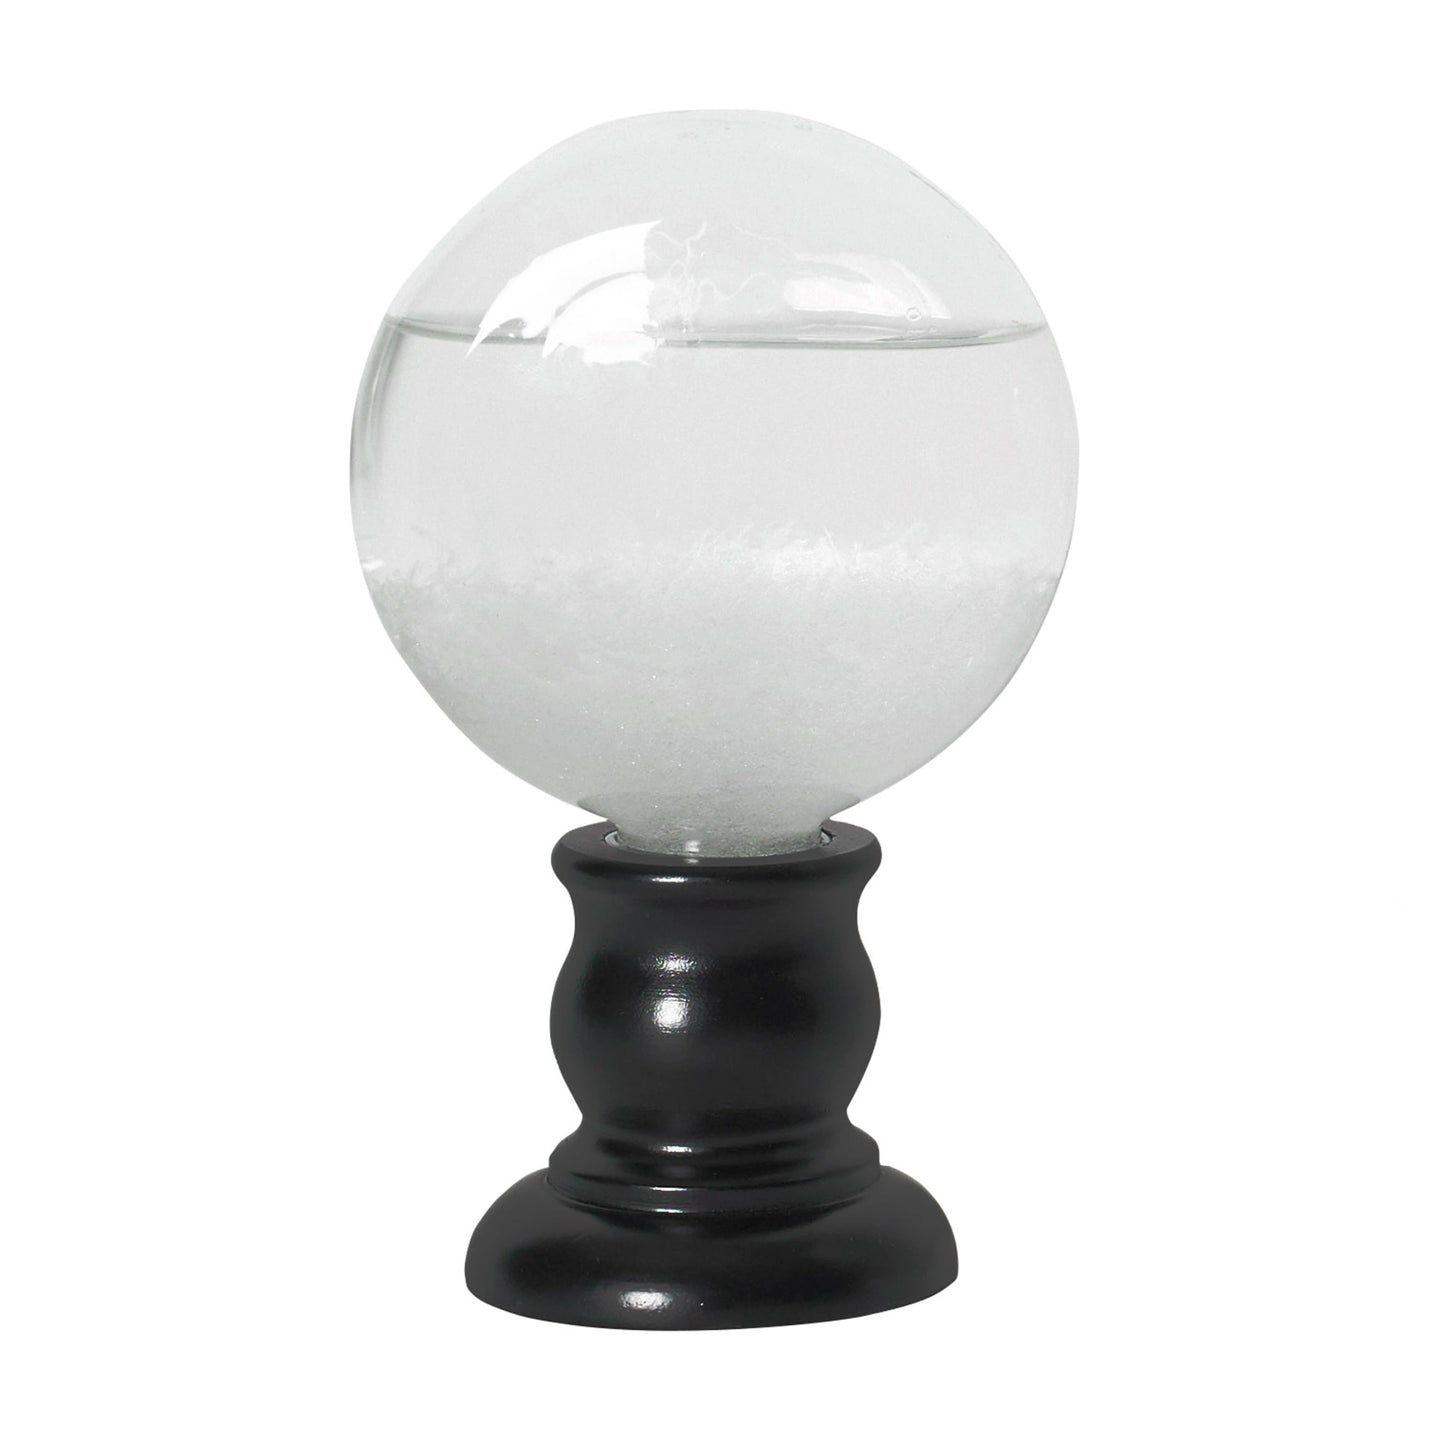 Authentic Models FitzRoy's Storm glass - SD001